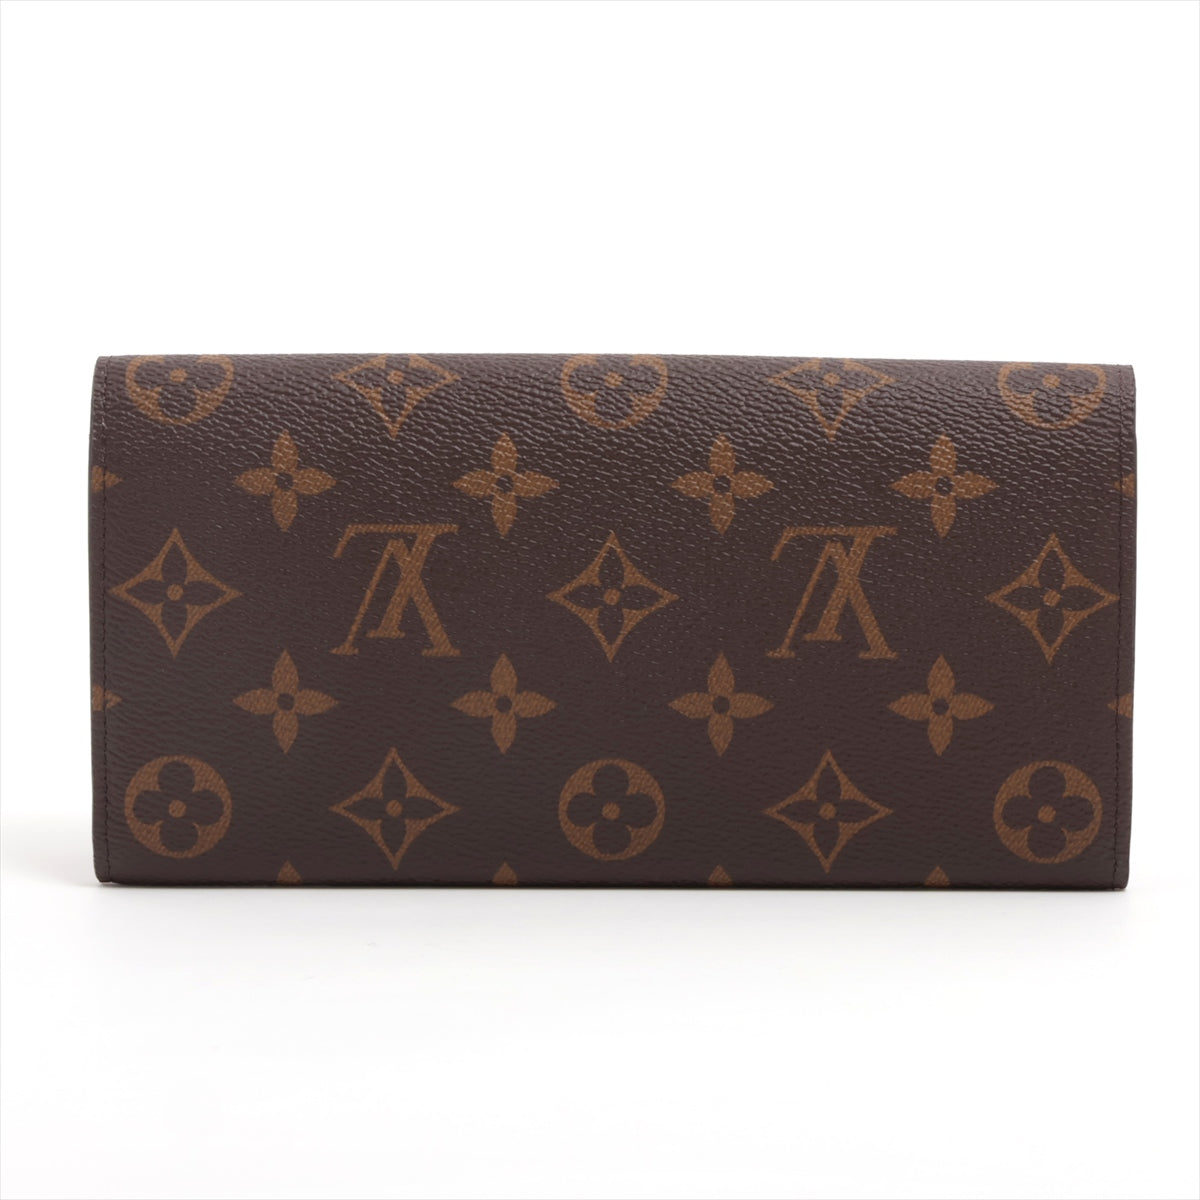 Louis Vuitton Monogram Portefeuille Emilie M60697 There was an RFID response